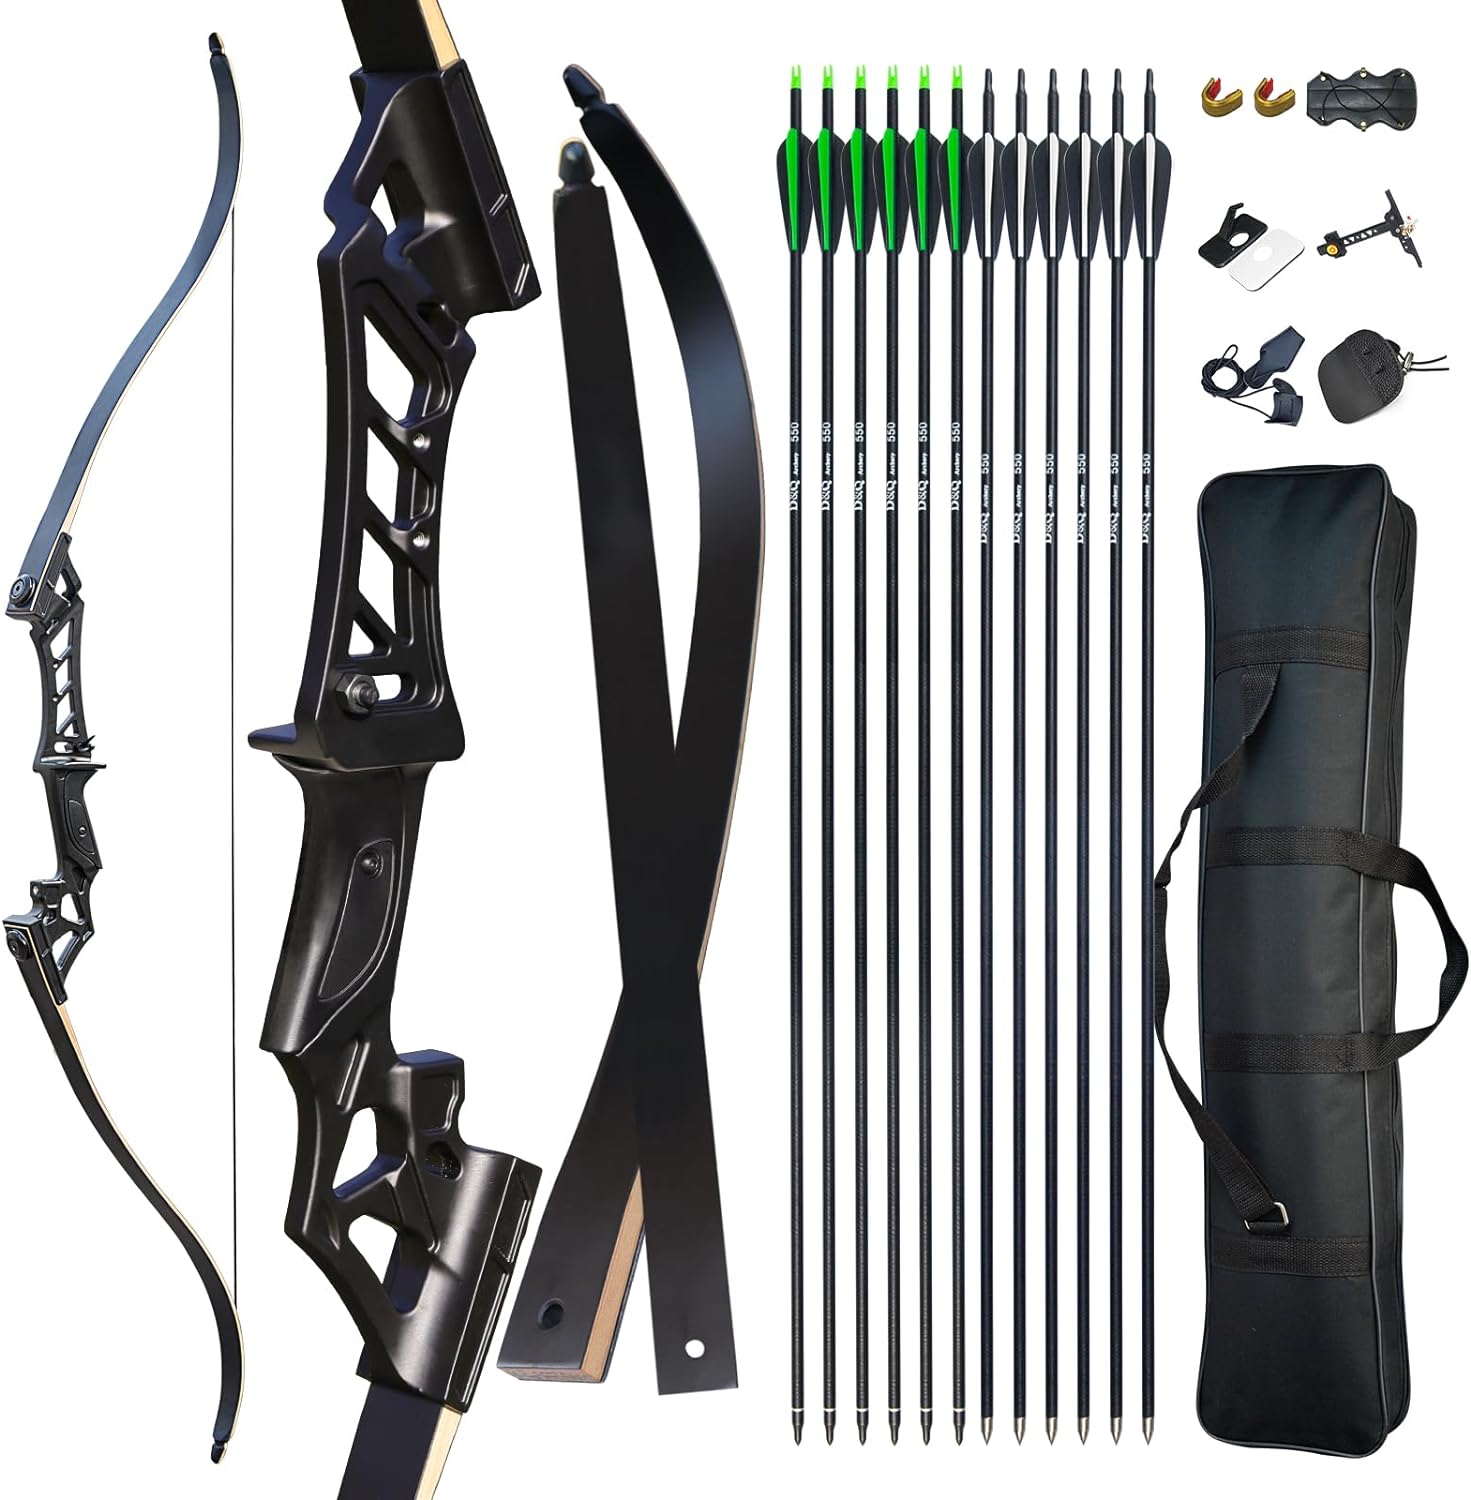 This D&Q 58'' Archery Recurve Bow and Arrow Set provides an unparalleled archery experience for adult beginners.